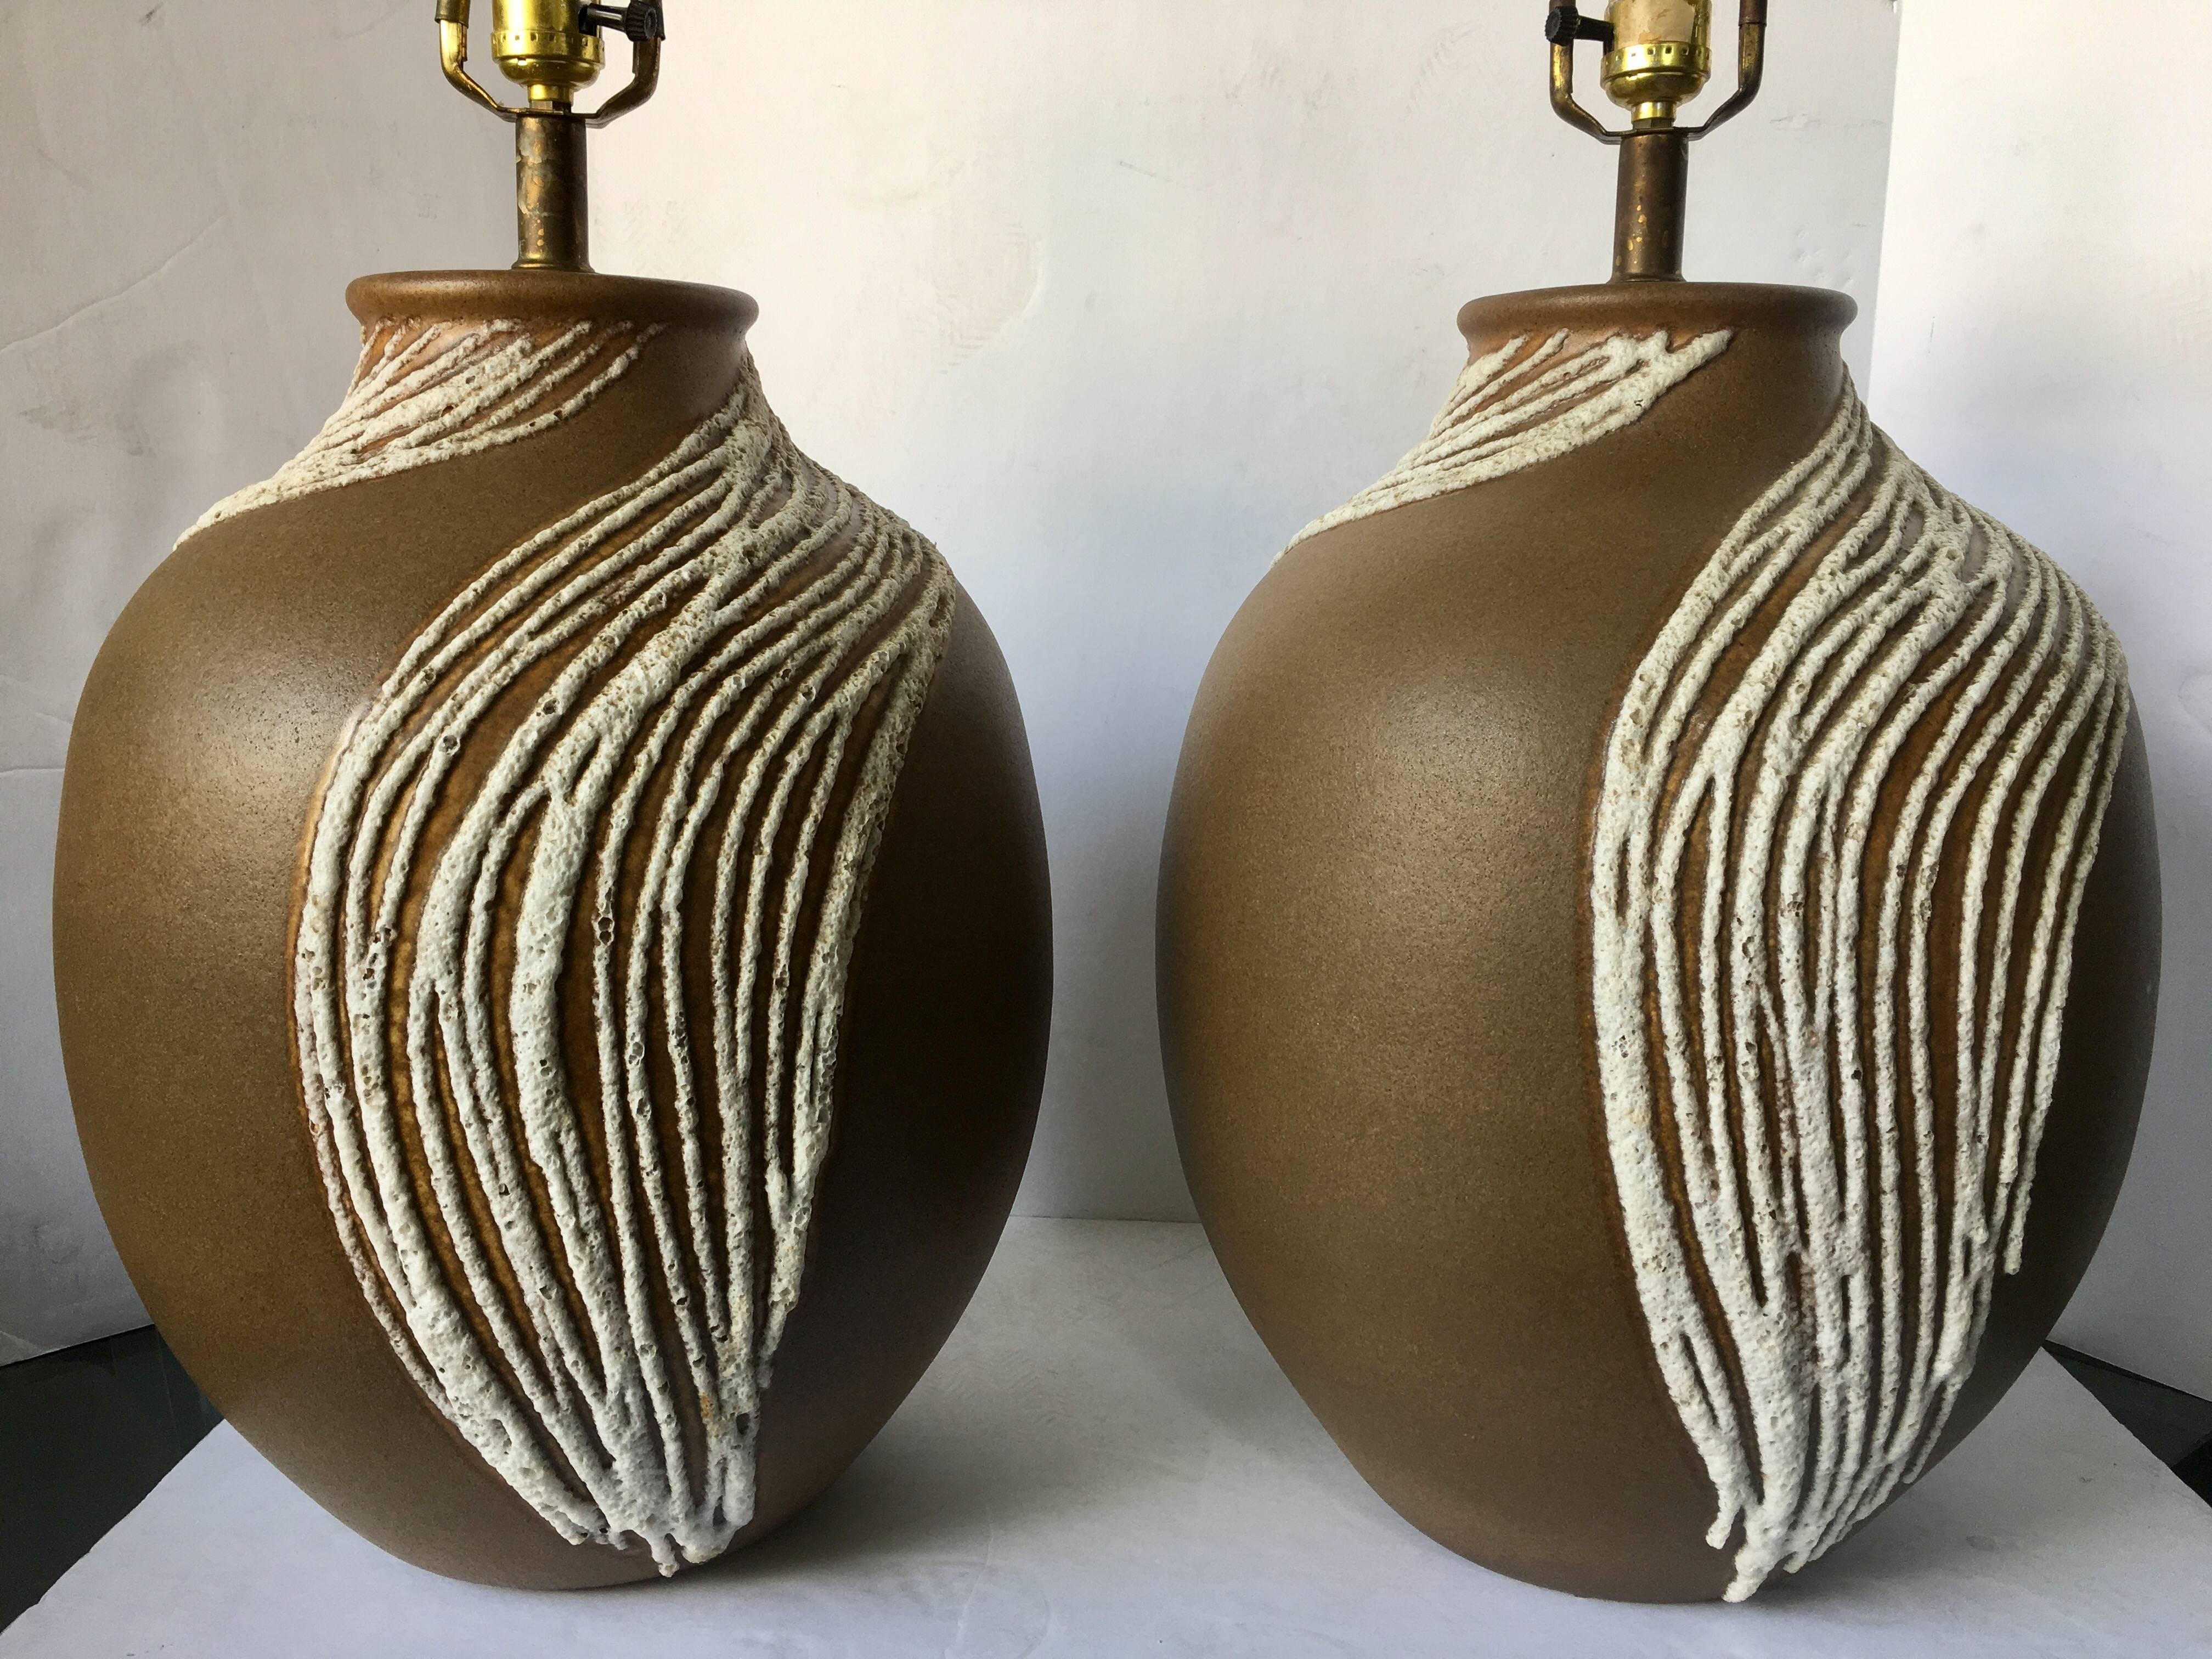 Sizable pair of Mid-Century Modern lava glazed drip pottery table lamps. Matte brown tone ceramic glazed bases feature a white dimensional lava/volcanic textured drip glaze.

Measures: Height to harp 32 inches high.
Height to socket 22 inches